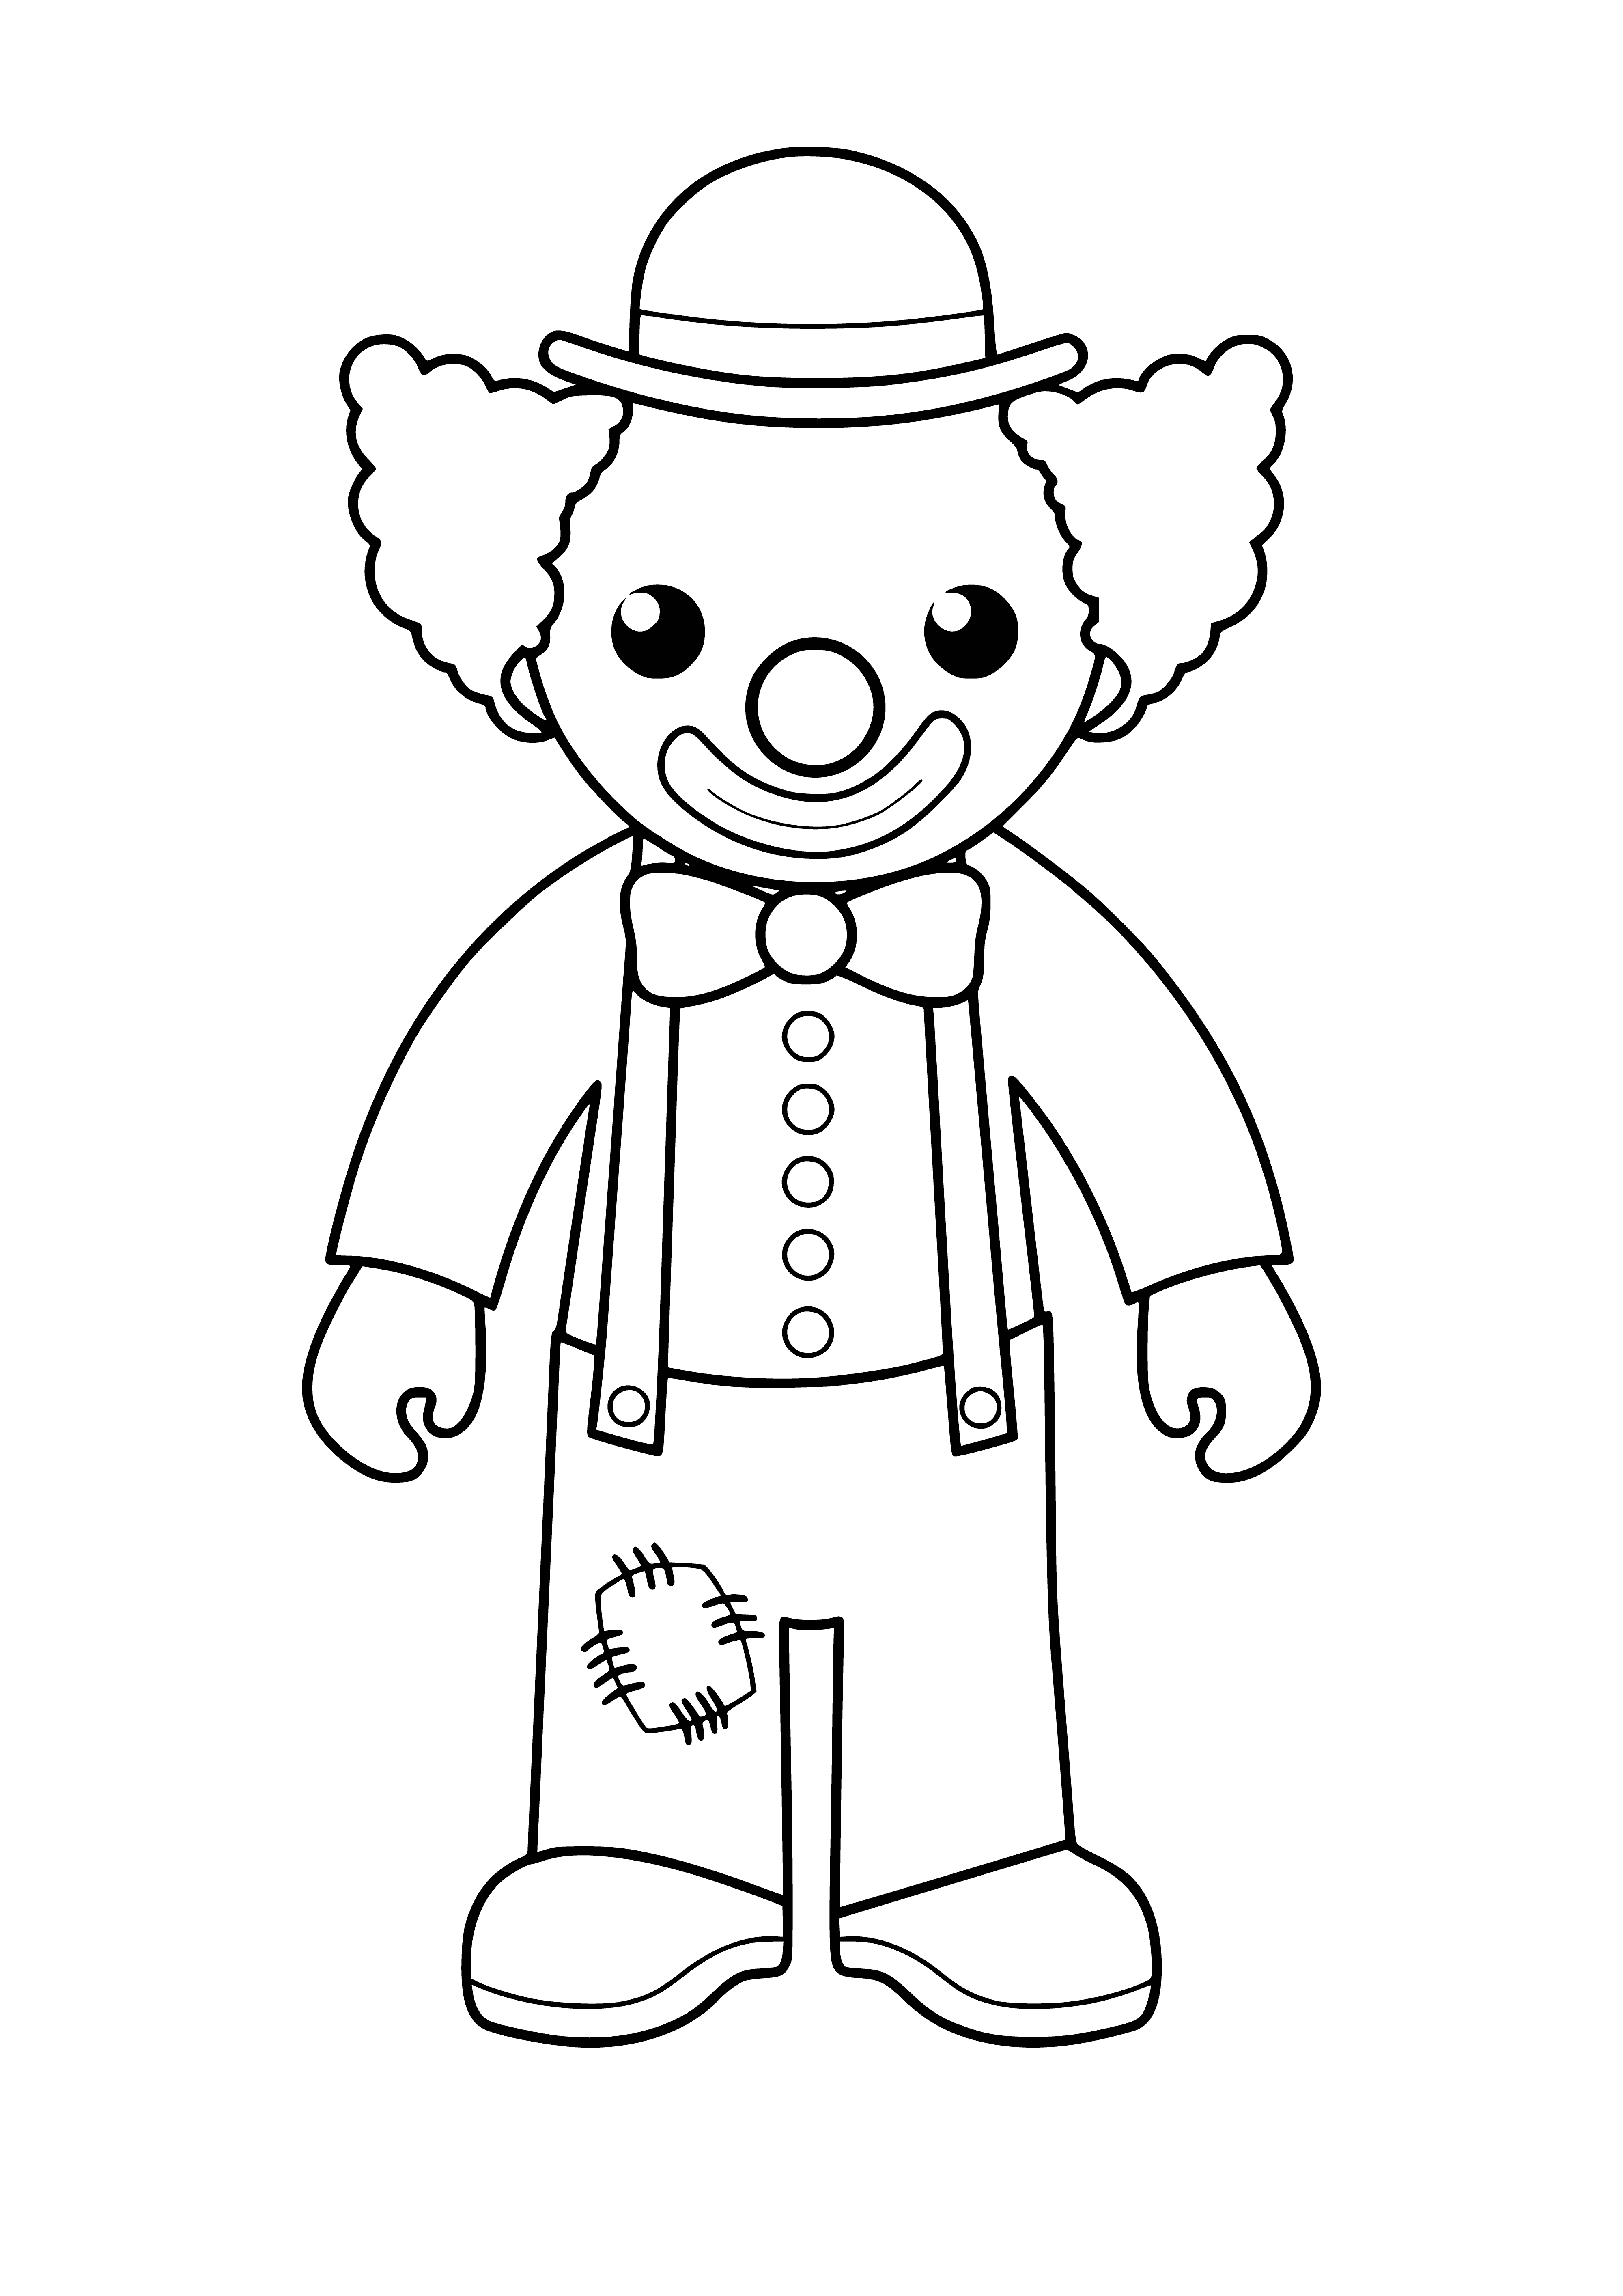 coloring page: Clown grins with red nose, colorful costume, holding two balloons outside circus tent.